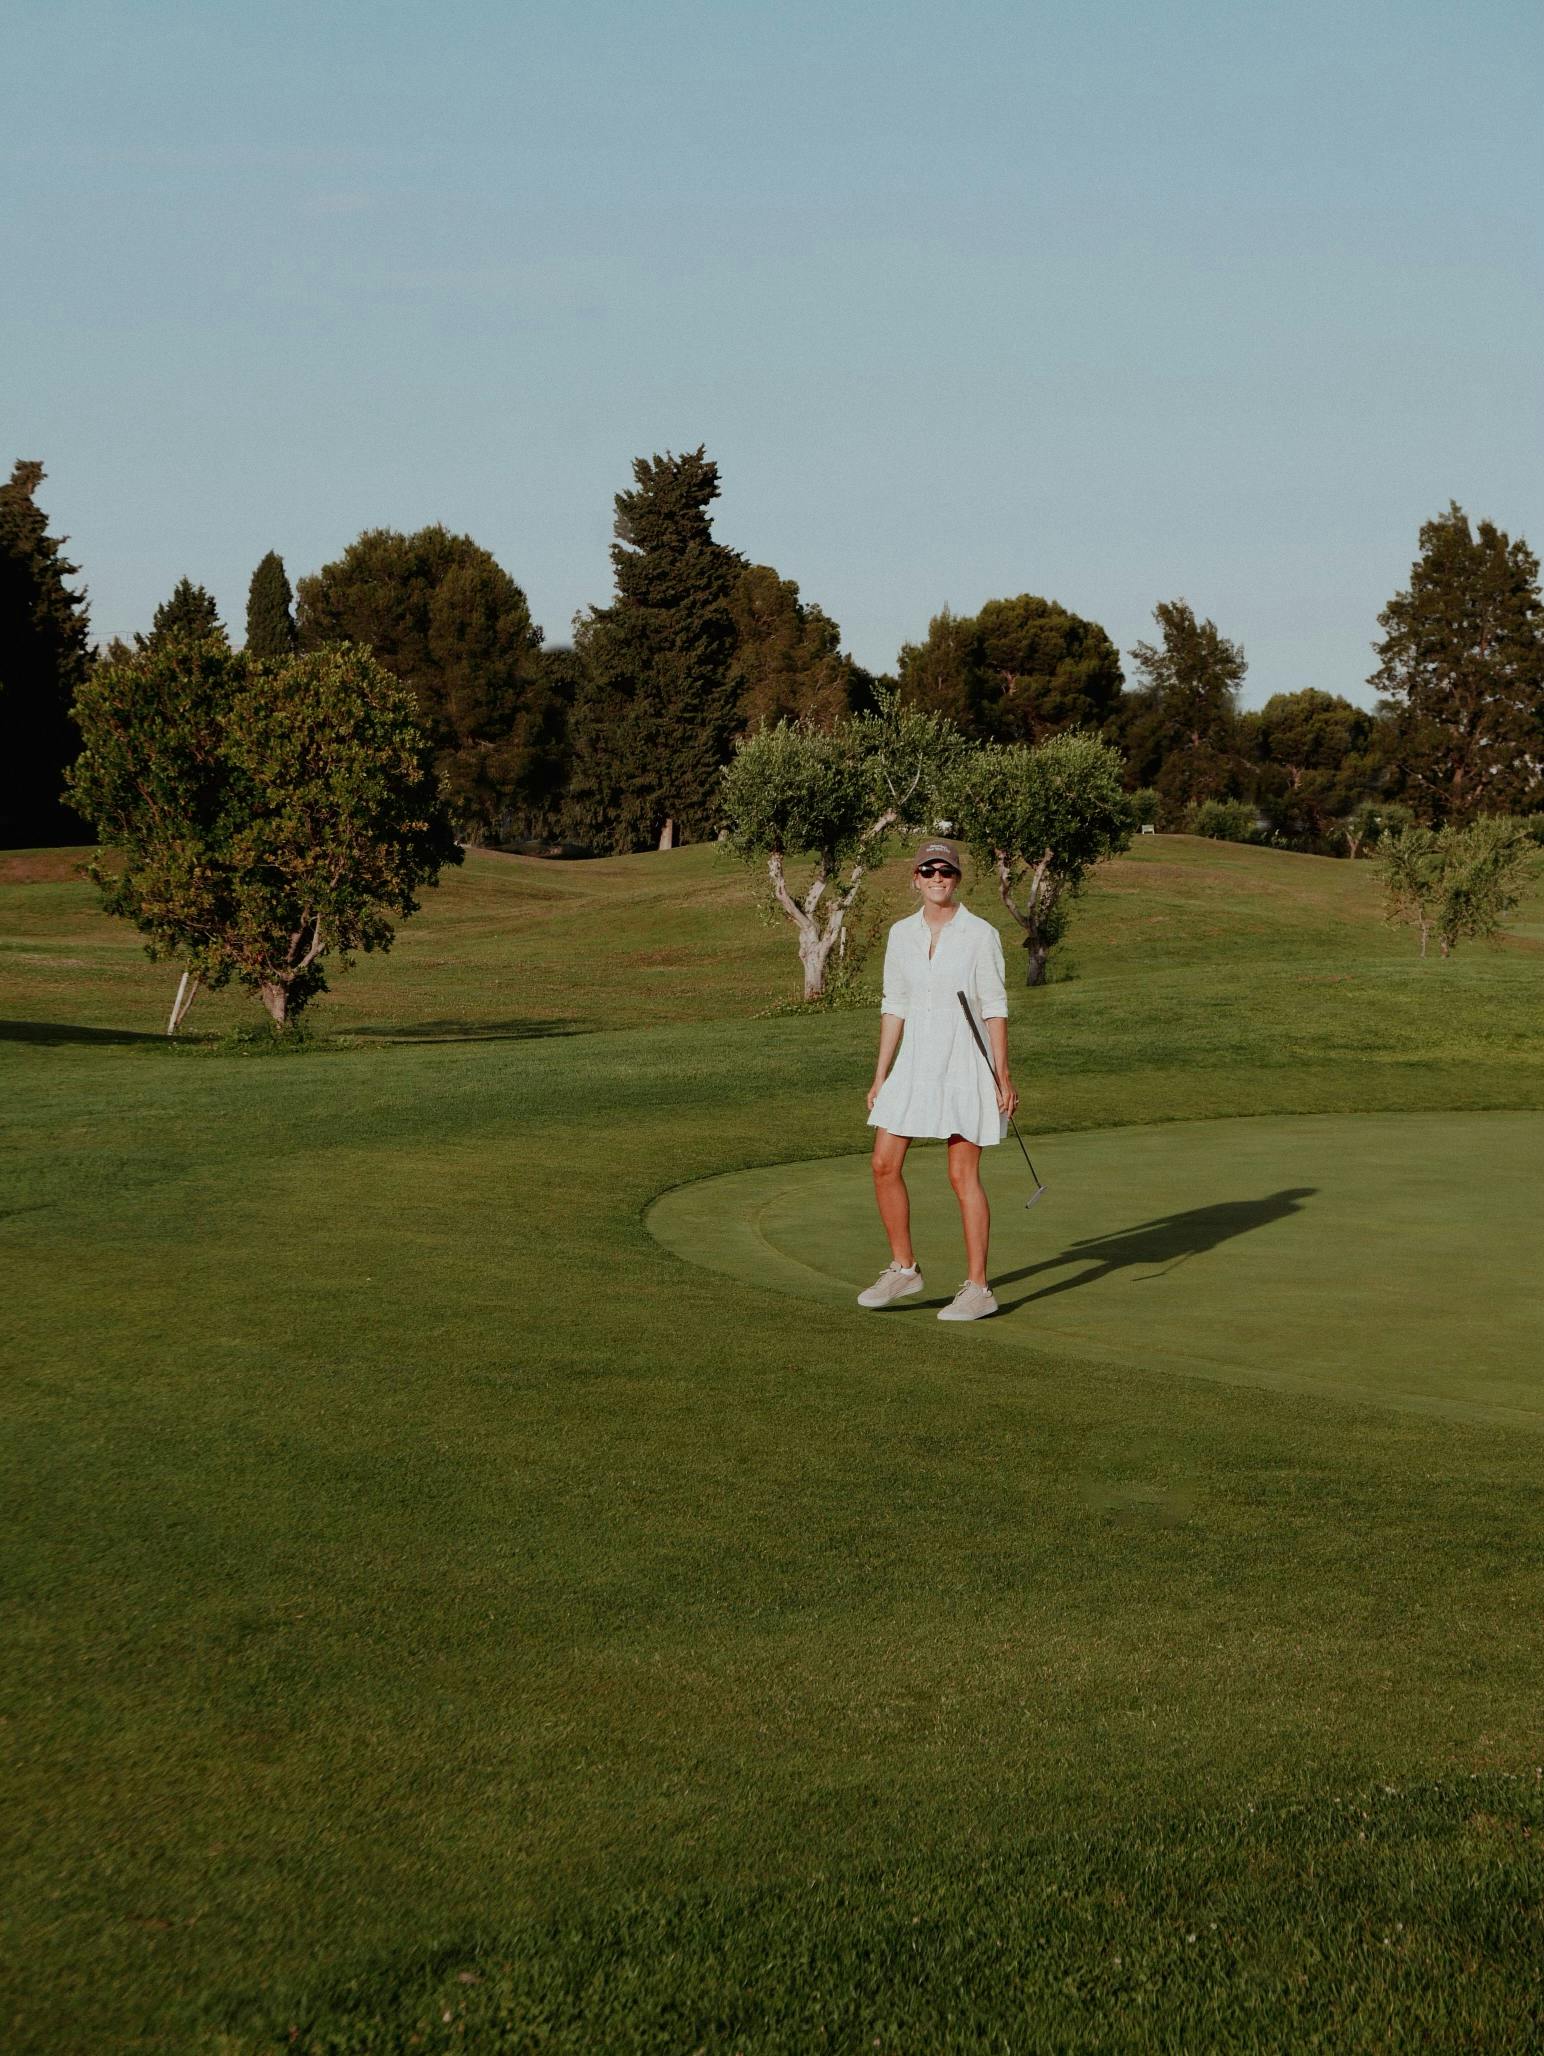 Katha playing golf in portugal